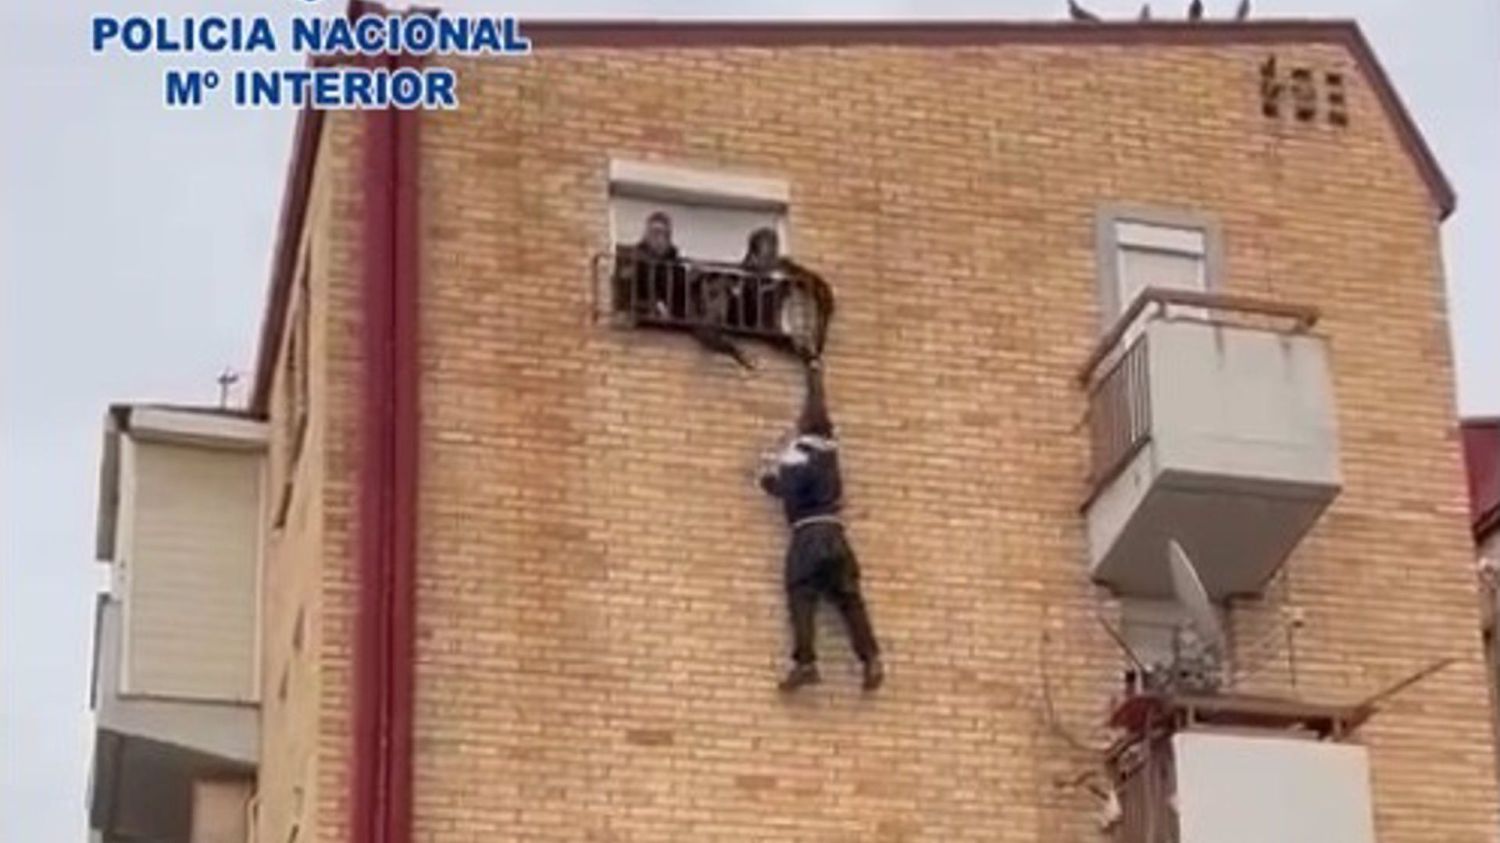 Police rescue robber who clung onto top floor window railing with one hand in Spain's Murcia